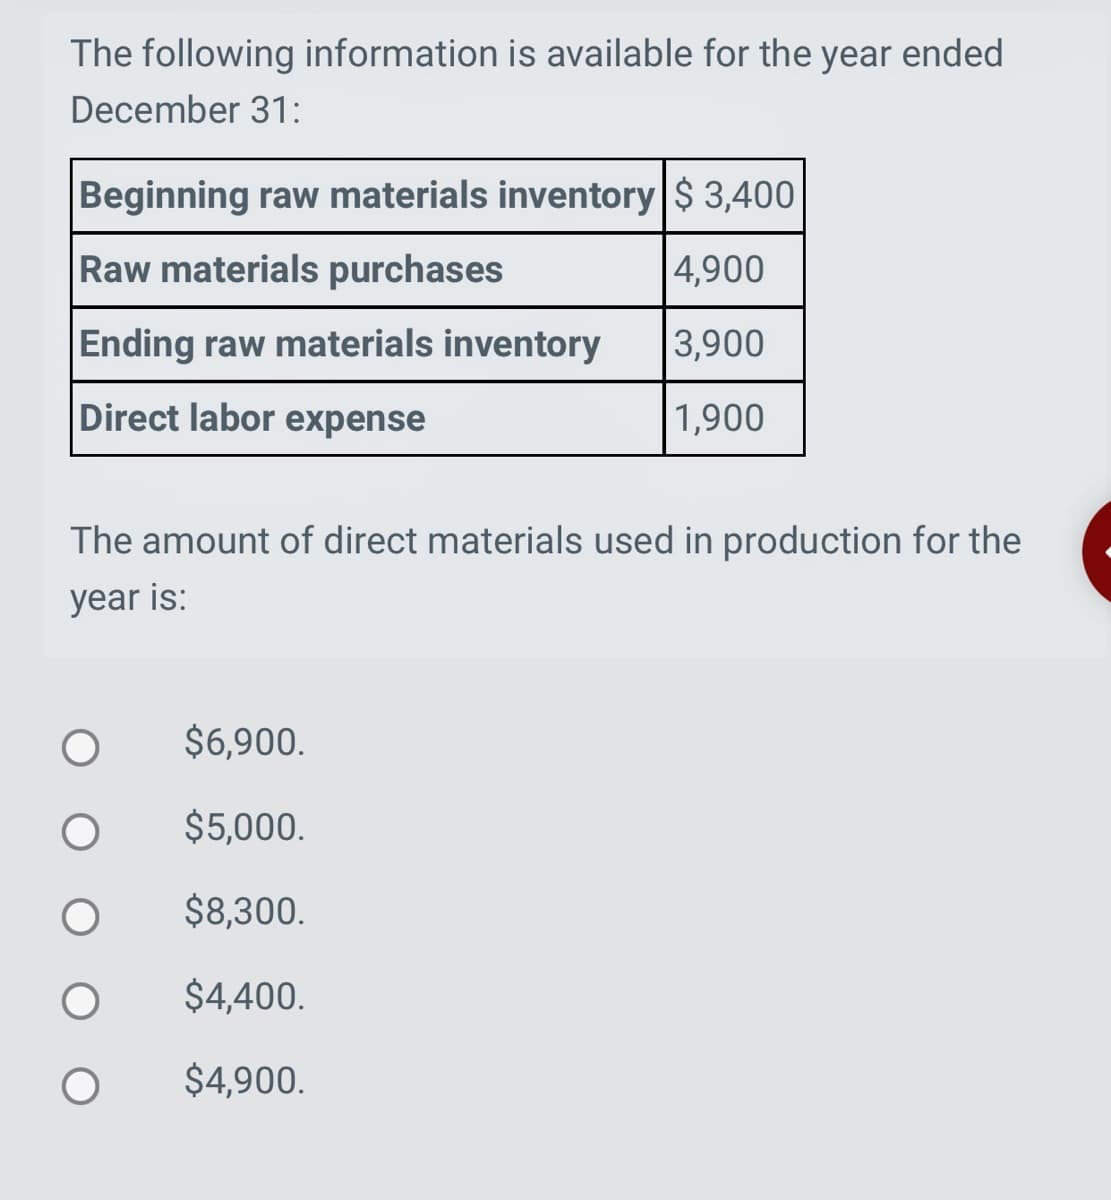 The following information is available for the year ended
December 31:
Beginning raw materials inventory $ 3,400
Raw materials purchases
4,900
Ending raw materials inventory
3,900
Direct labor expense
1,900
The amount of direct materials used in production for the
year is:
O
$6,900.
$5,000.
$8,300.
$4,400.
$4,900.